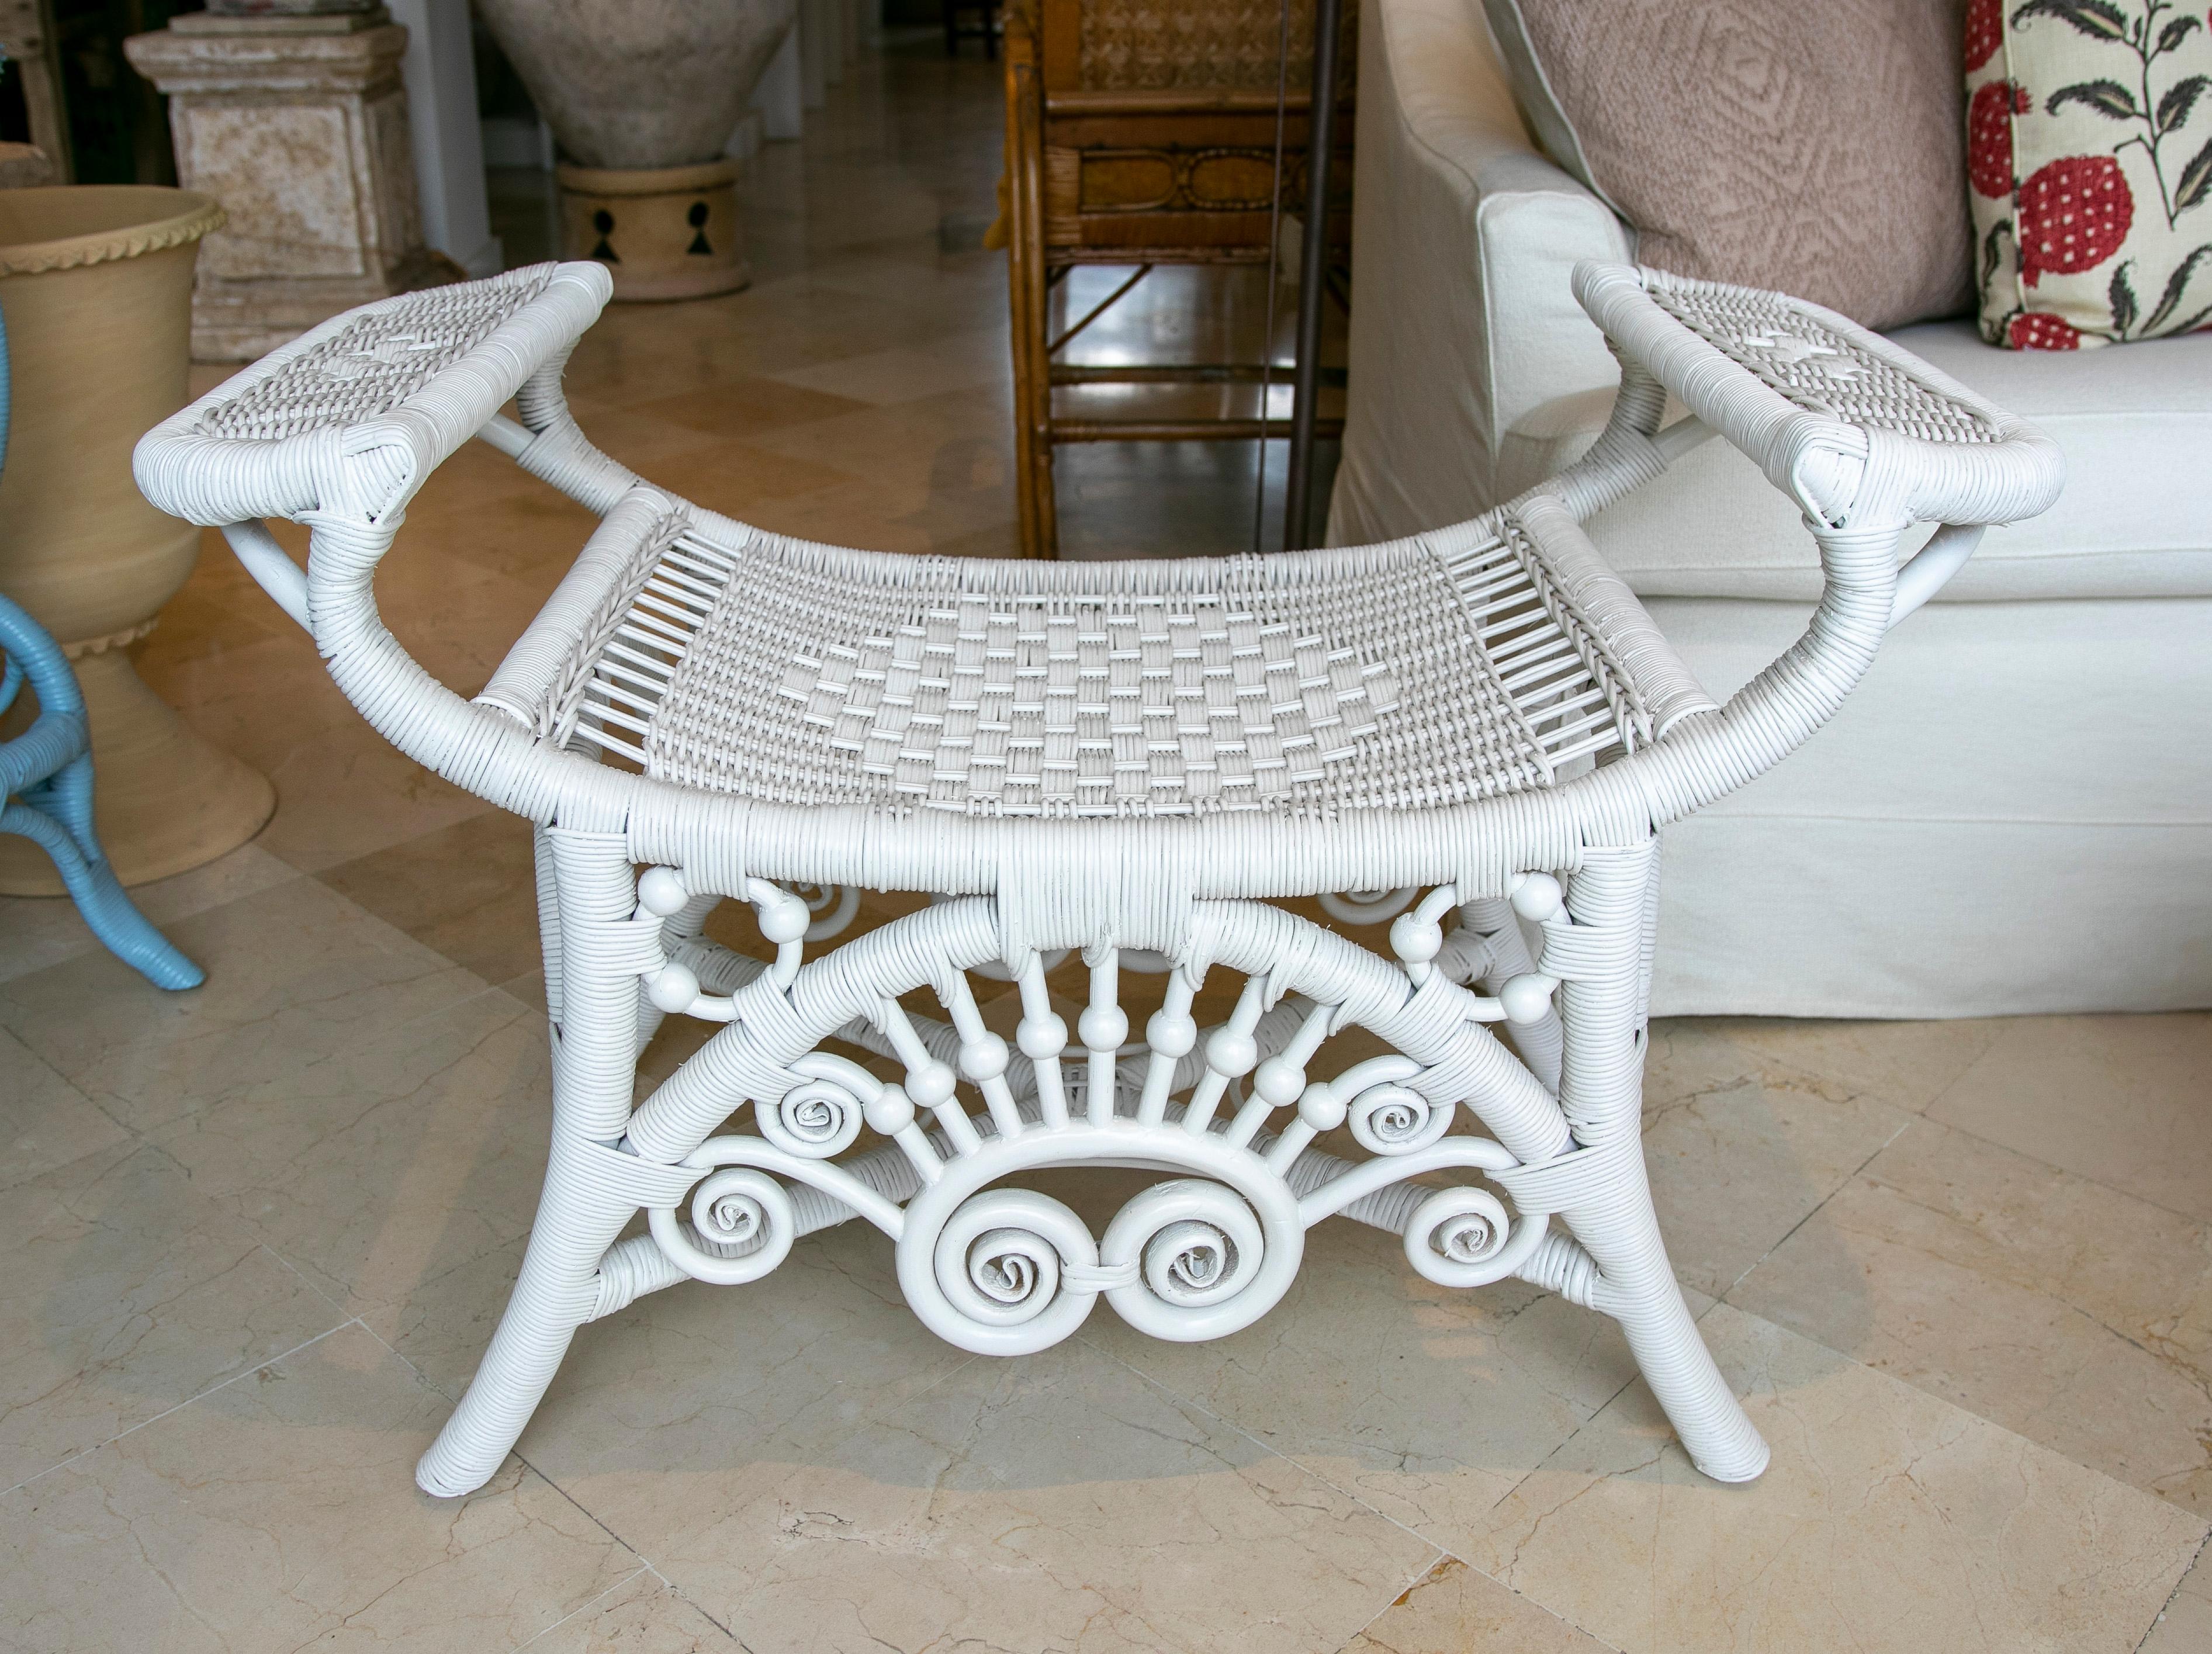 Spanish pair of handmade wicker stools lacquered in white colour.